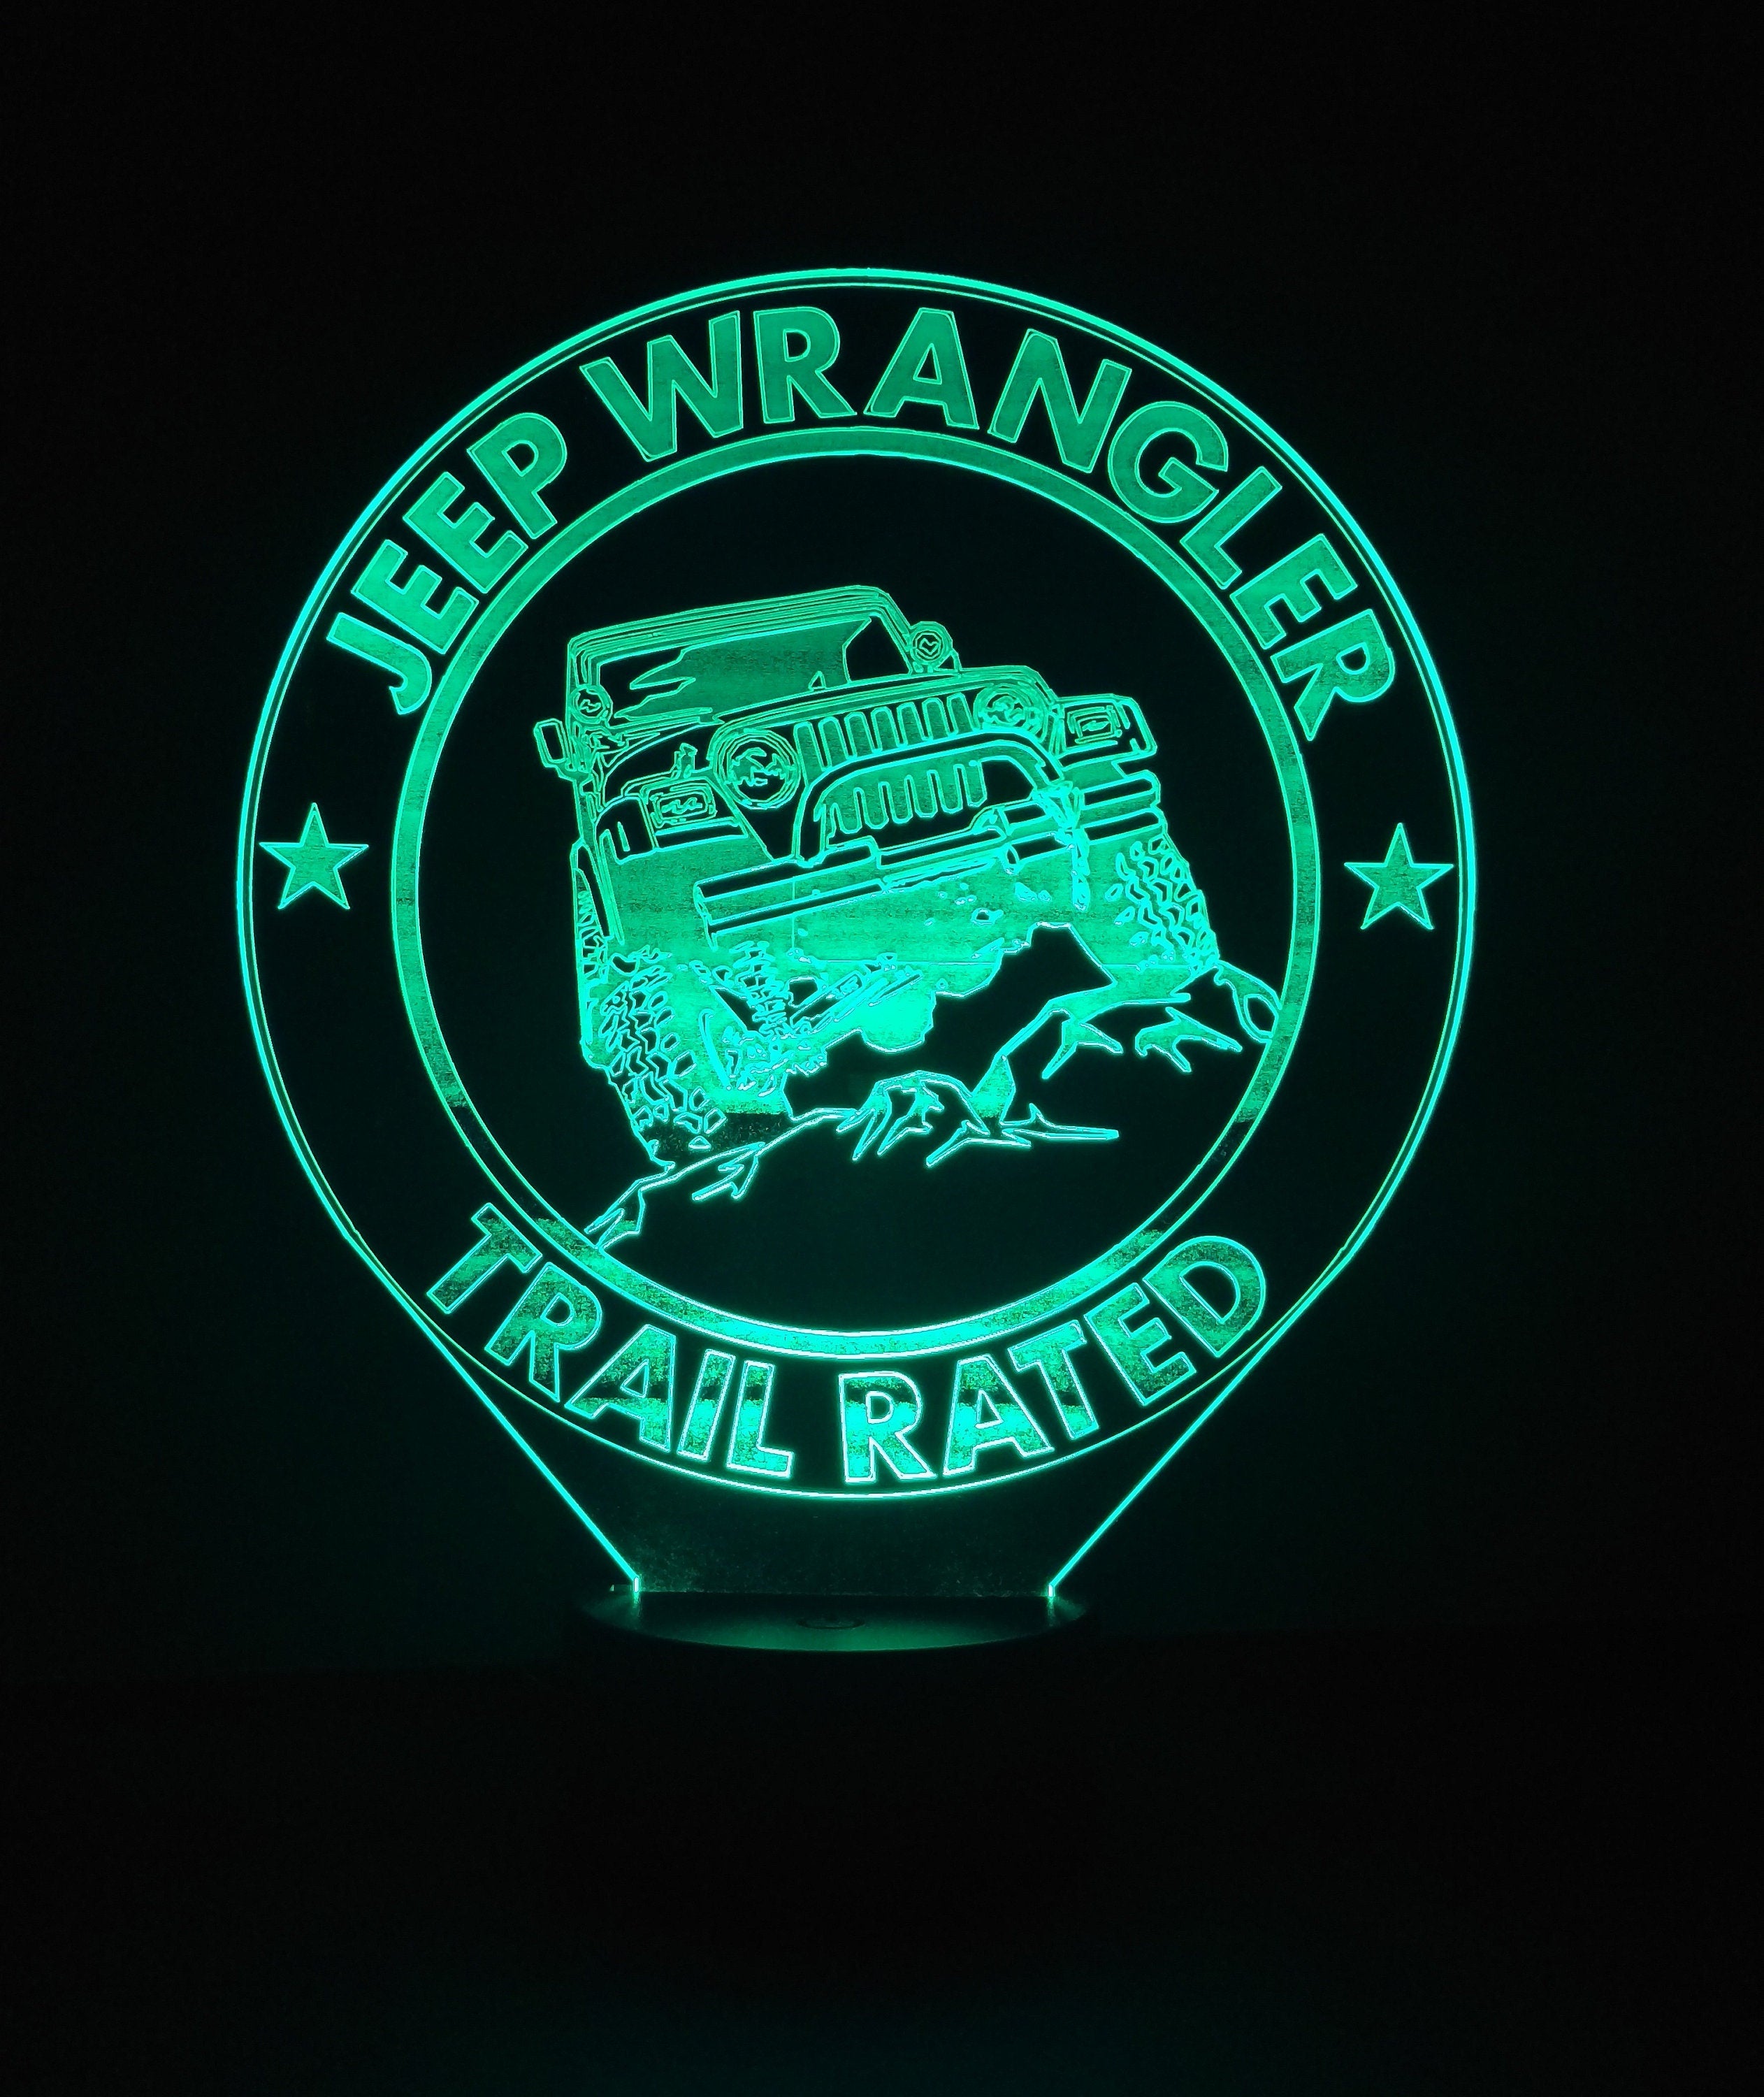 Awesome "Jeep Wrangler - Trail Rated" LED lamp (1106) - FREE SHIPPING!